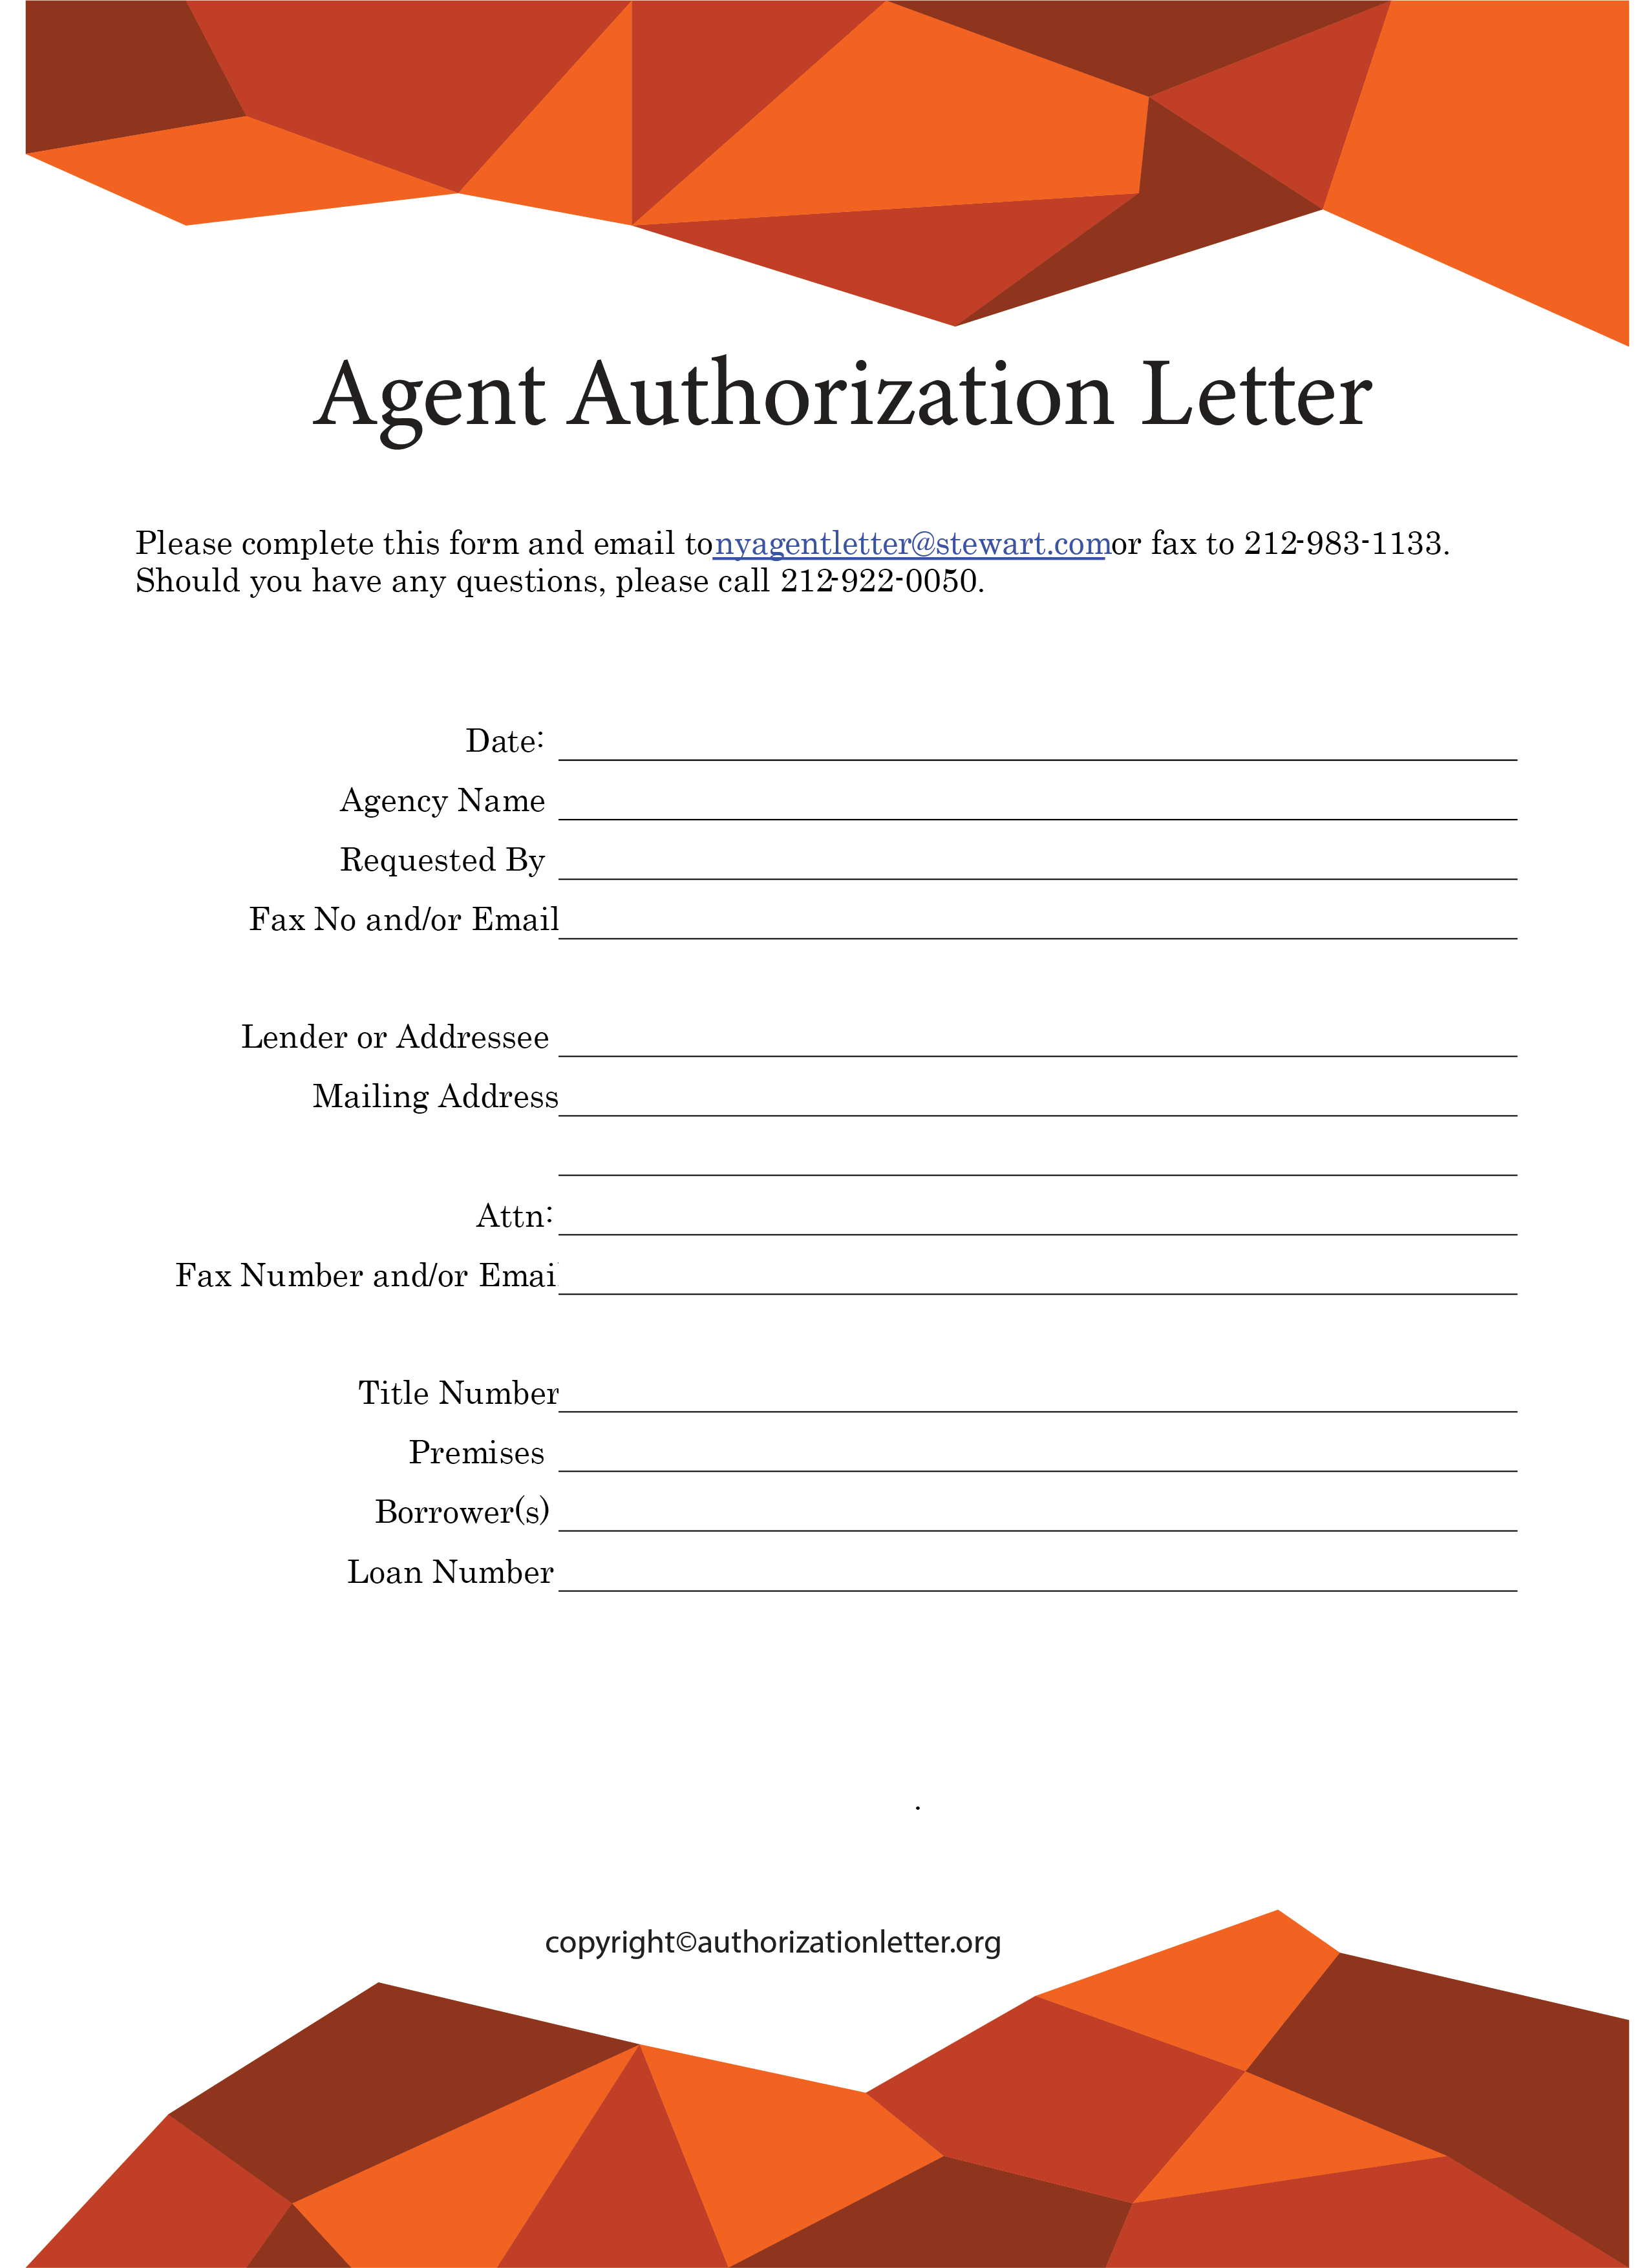 Sample Authorized Agent Letter Format